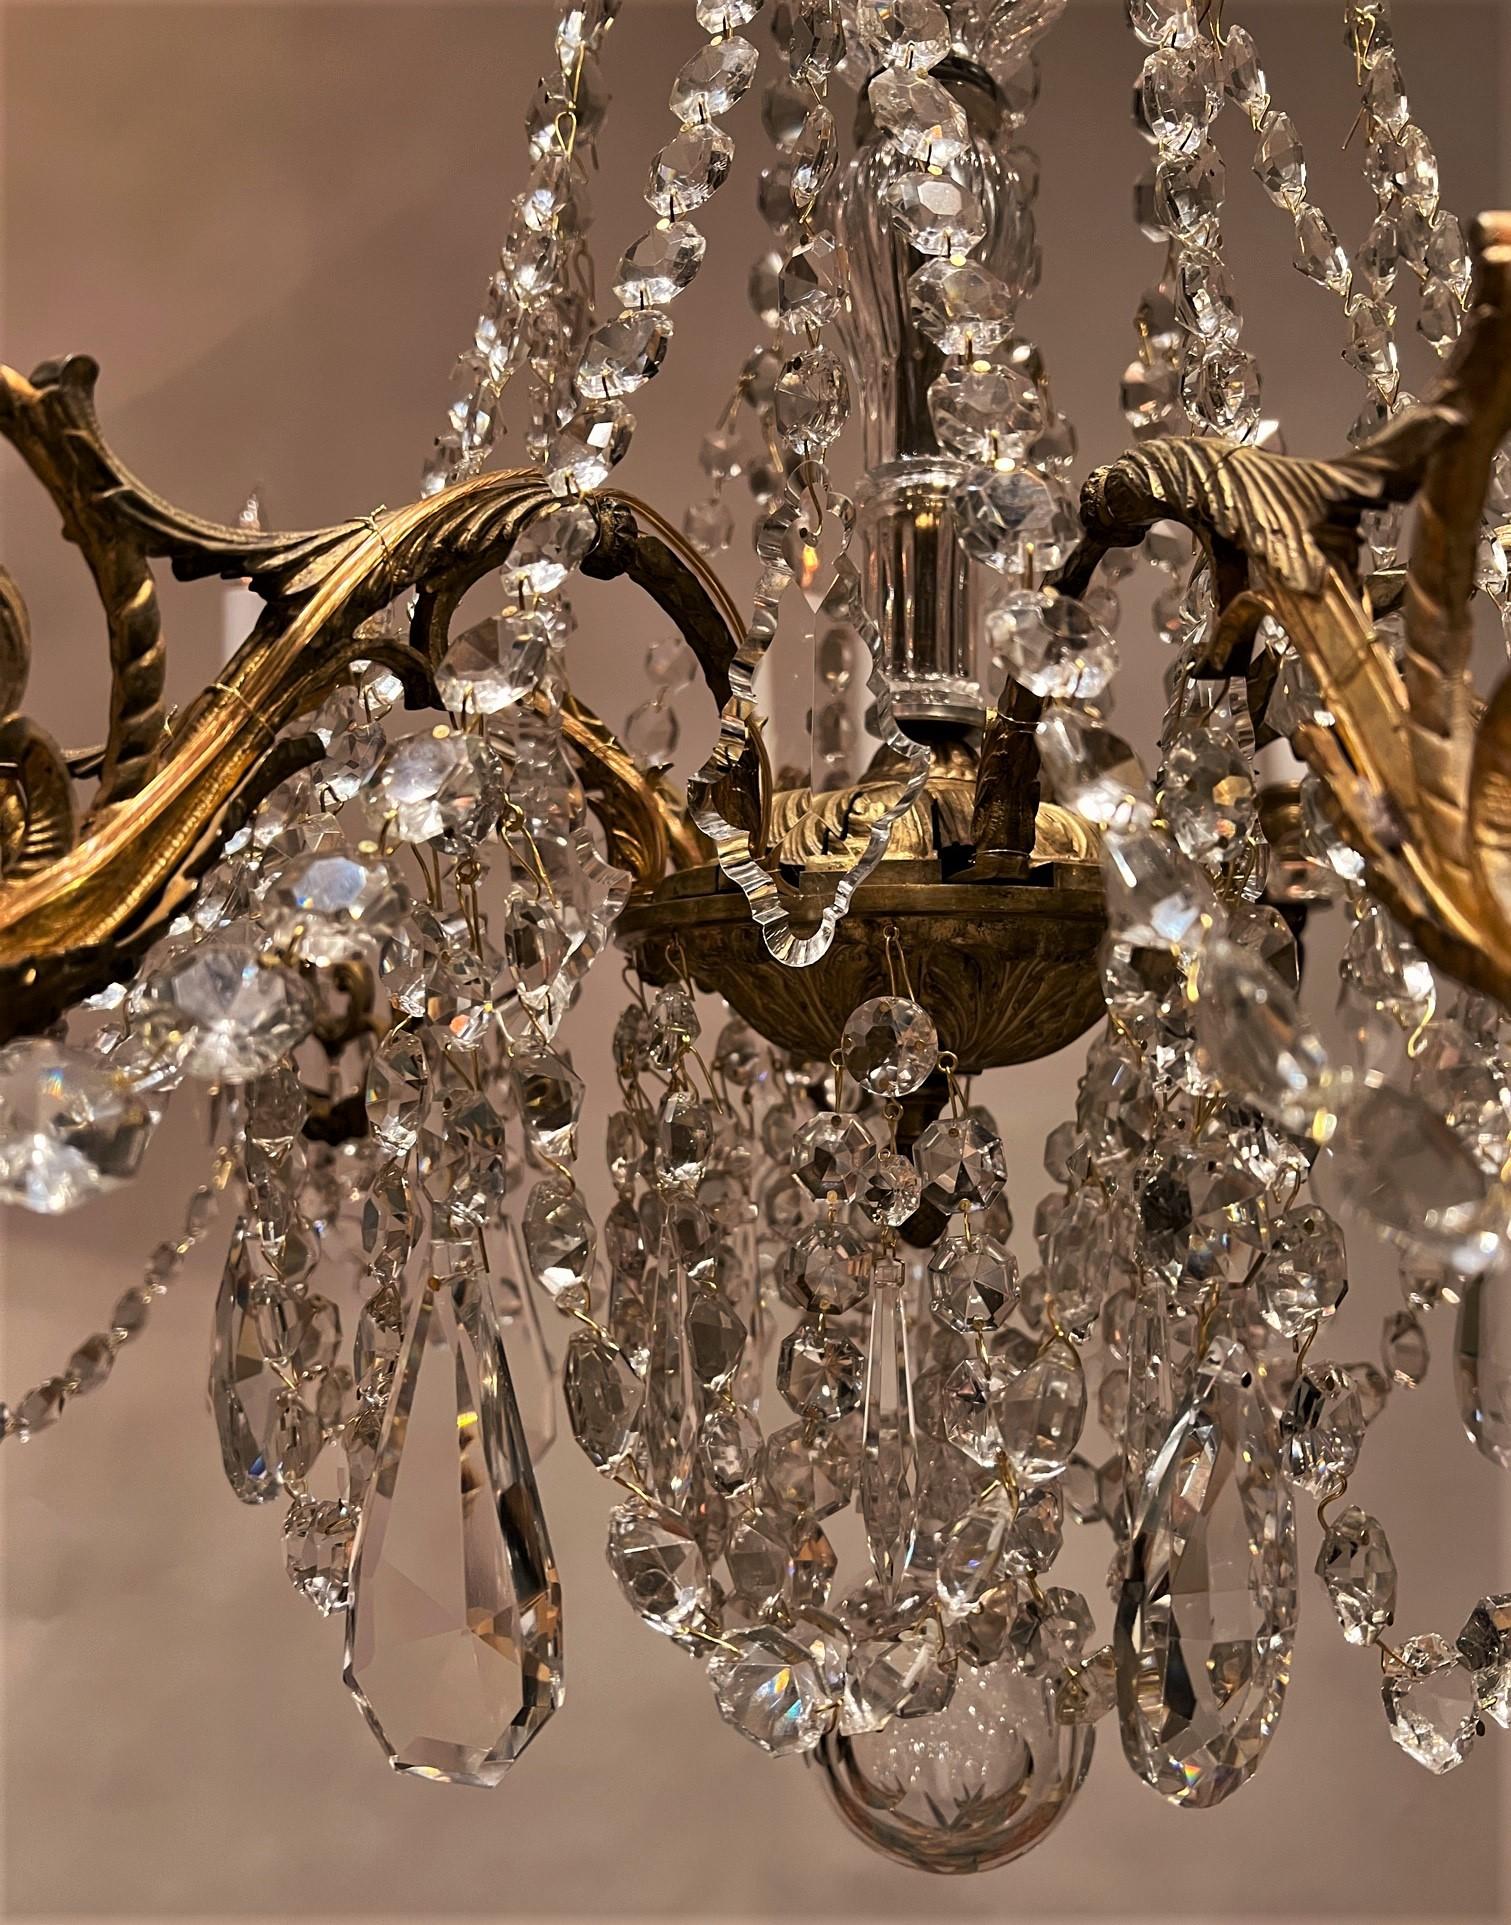 This beautiful Belle Epoque chandelier has a hand-cast gilt brass frame & hand-cut crystal prisms. It was originally a candle fixture that was not electrified until the 1930's and has now been newly re-wired. Baccarat style prisms adorn the